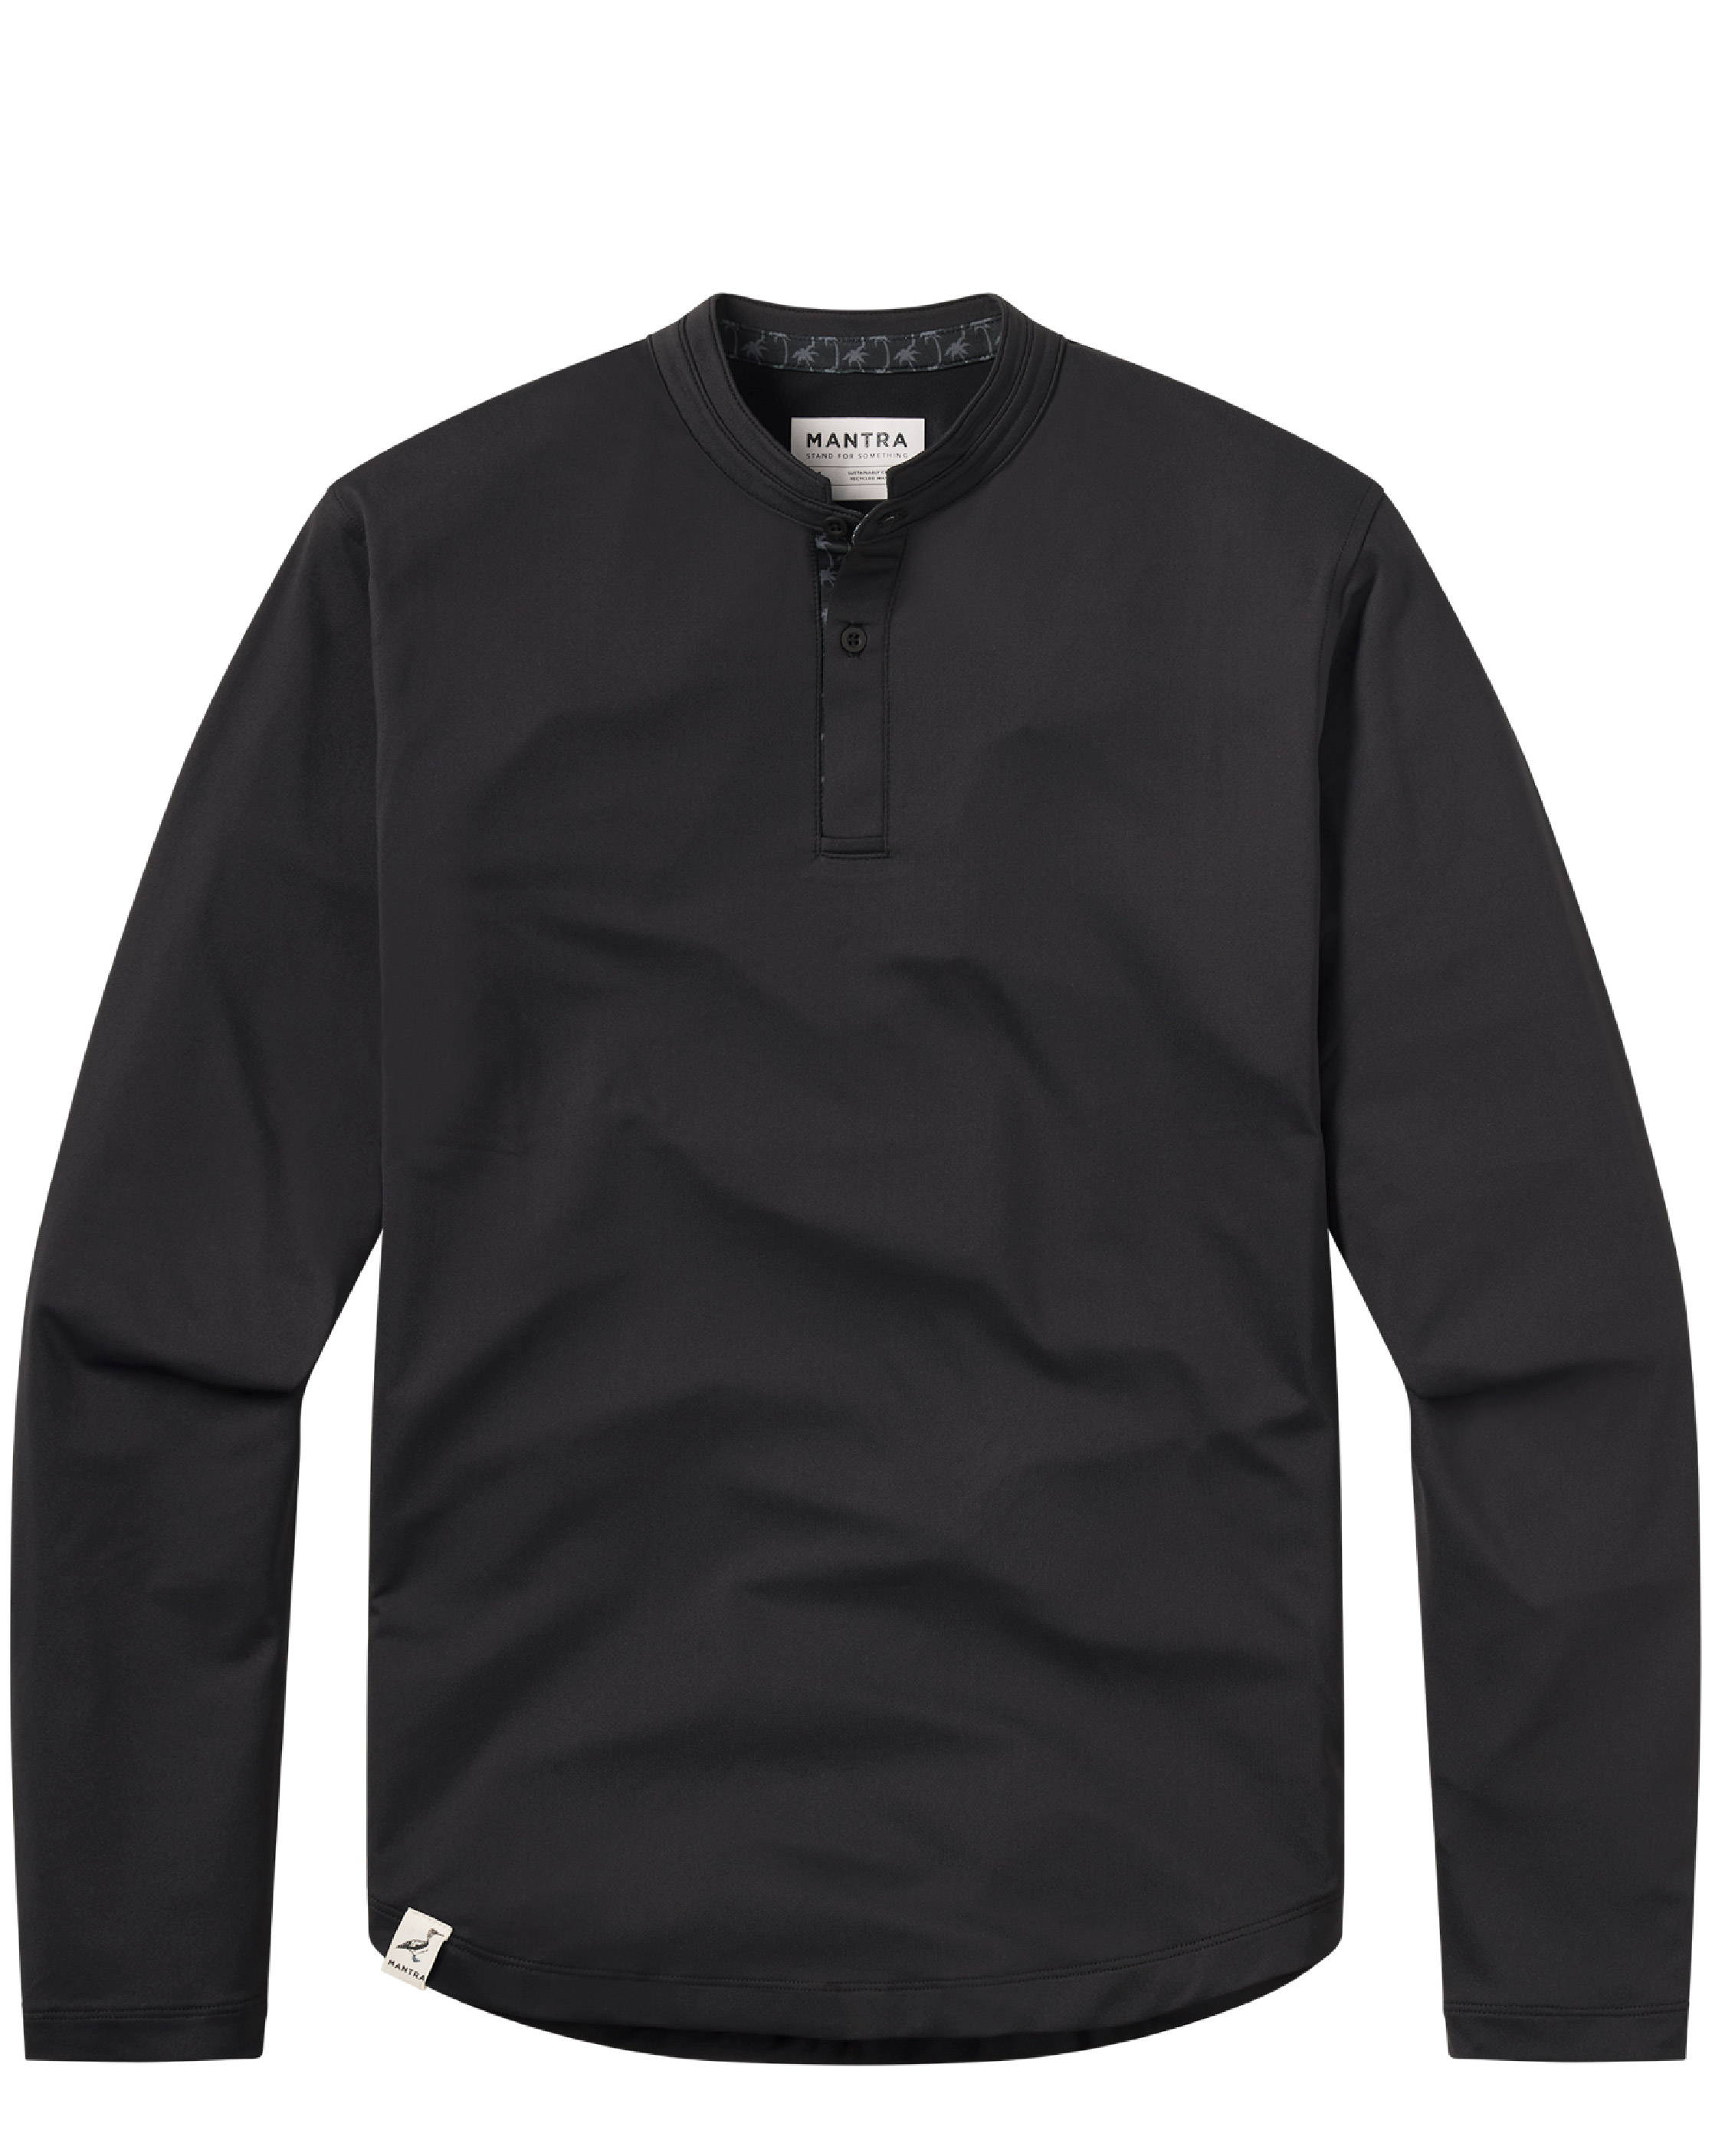 CATALYST POLO L/S - MANTRA COLLAR - PALM CONTRAST color selector